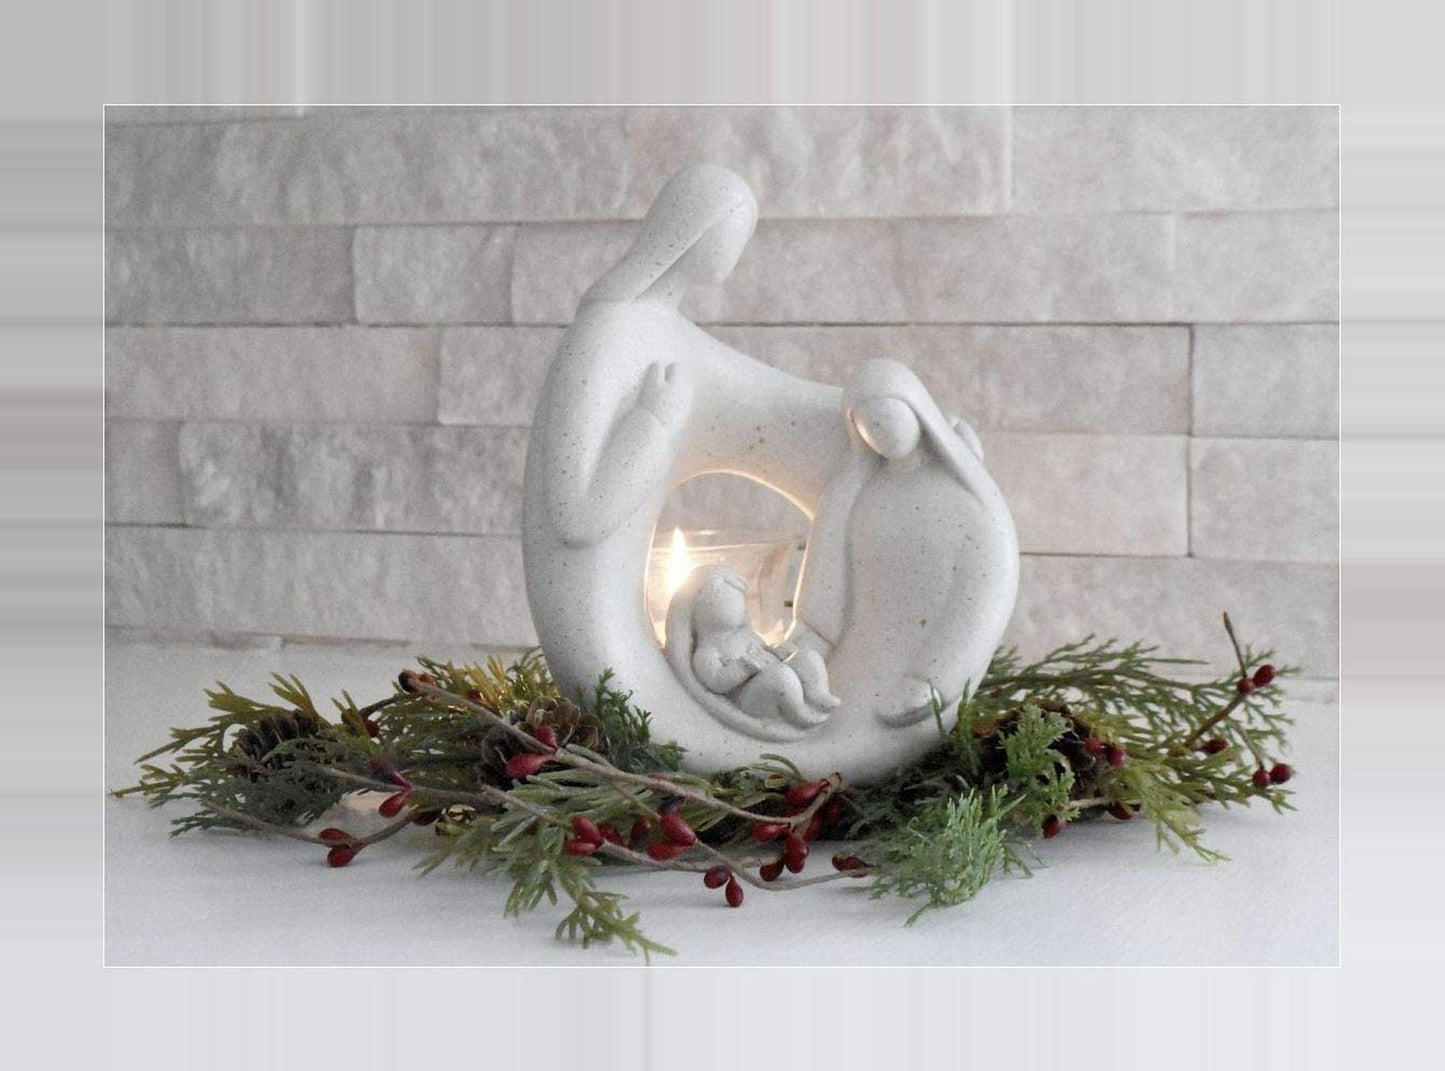 Nativity Statue Candleholder With LED Tealight Christmas Decoration or Gift